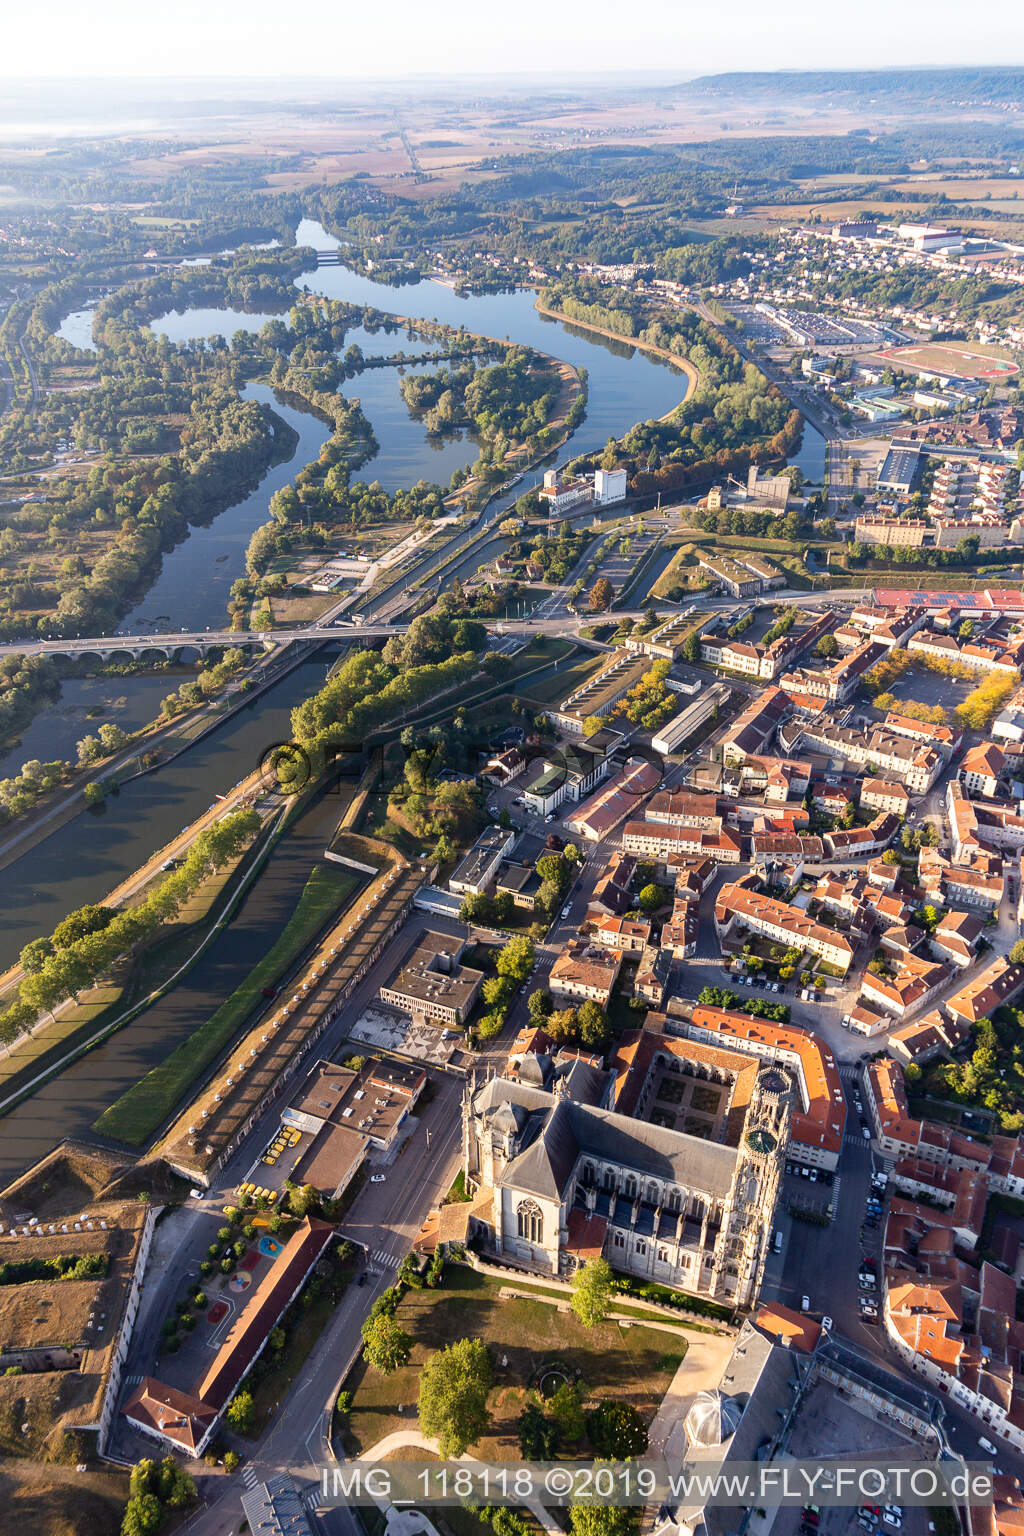 Cathedrale Saint-Etienne de Toul in Toul in the state Meurthe et Moselle, France out of the air